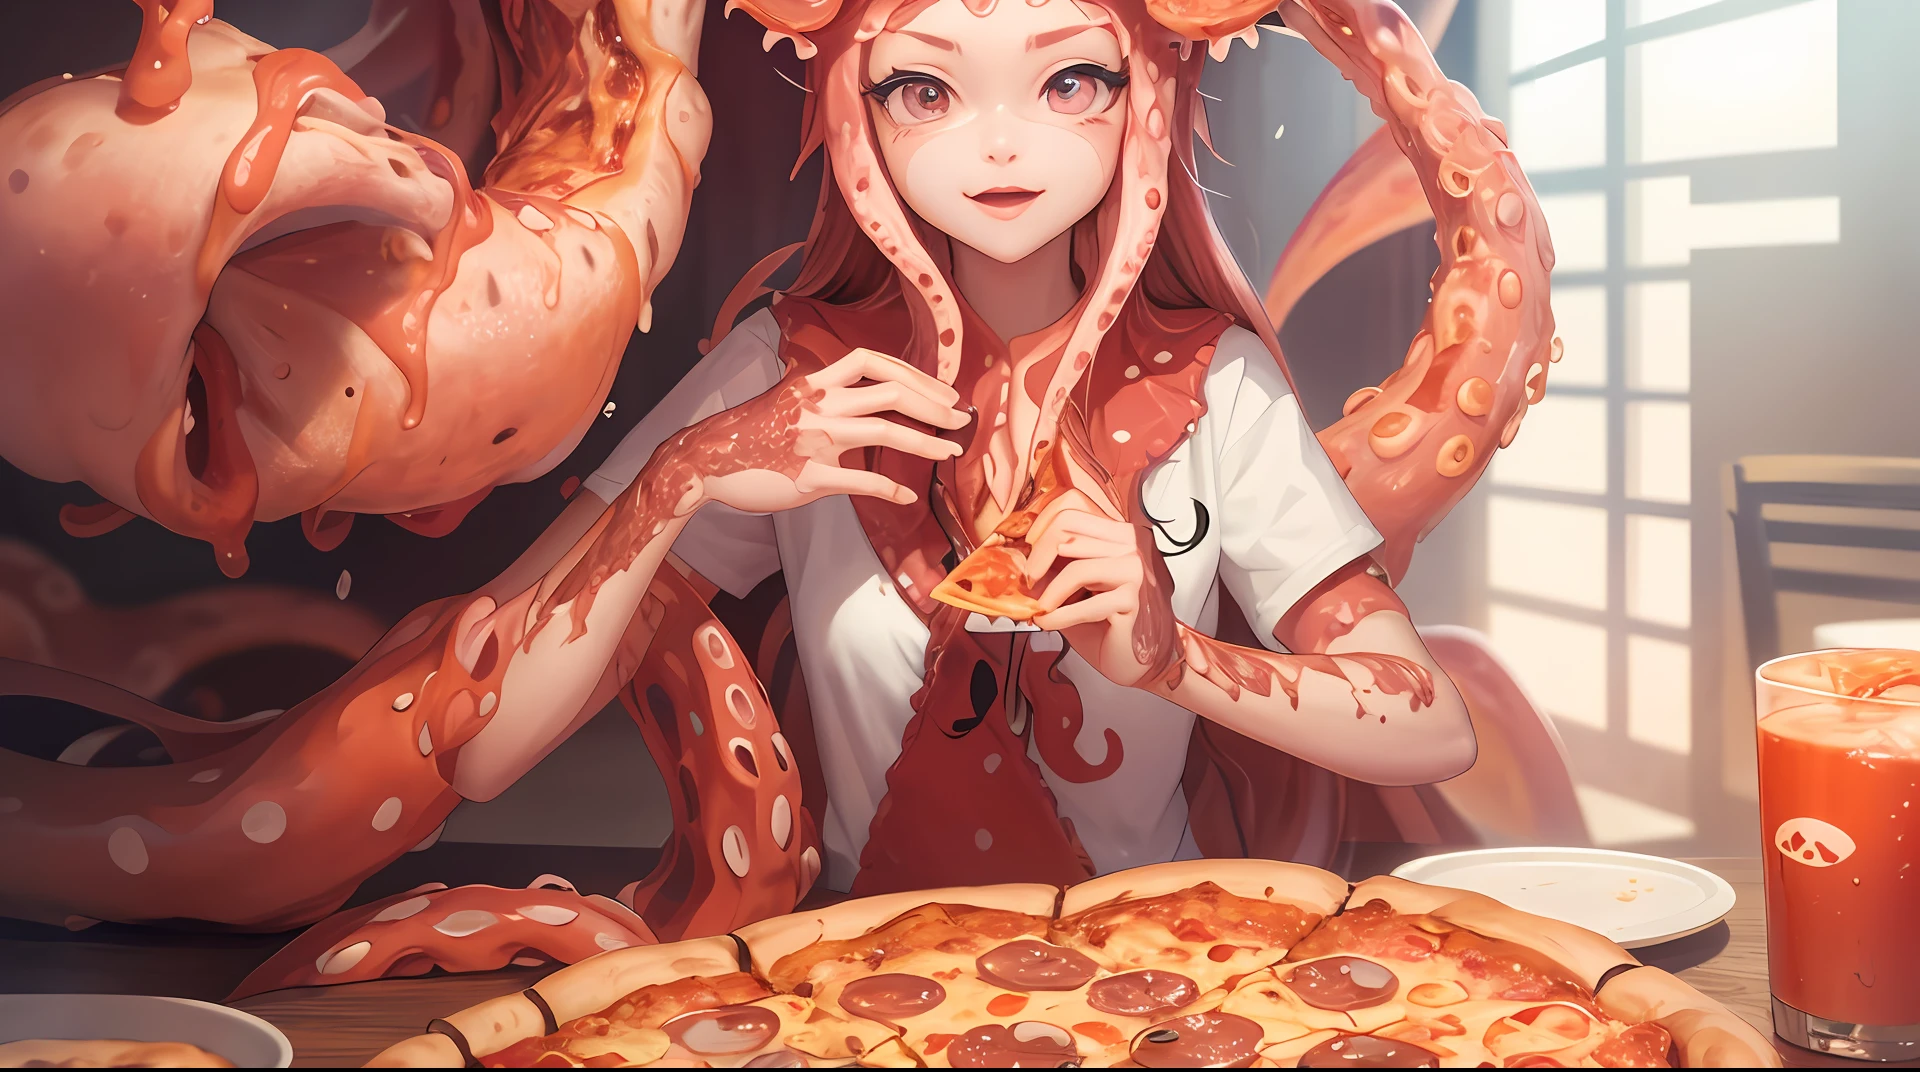 Best quality，Pizza，Tentacle fear，there is a woman sitting at a table with a pizza and octopus tentacles, munching pizza, eating pizza, tentacles wrapped around burgers, pizza!, tentacles around, presenting pizza, humanoid pink female squid girl, eating a pizza, anime food, detailed digital anime art, pizza, amazing food illustration, sharing a pizza, some tentacles are touching her